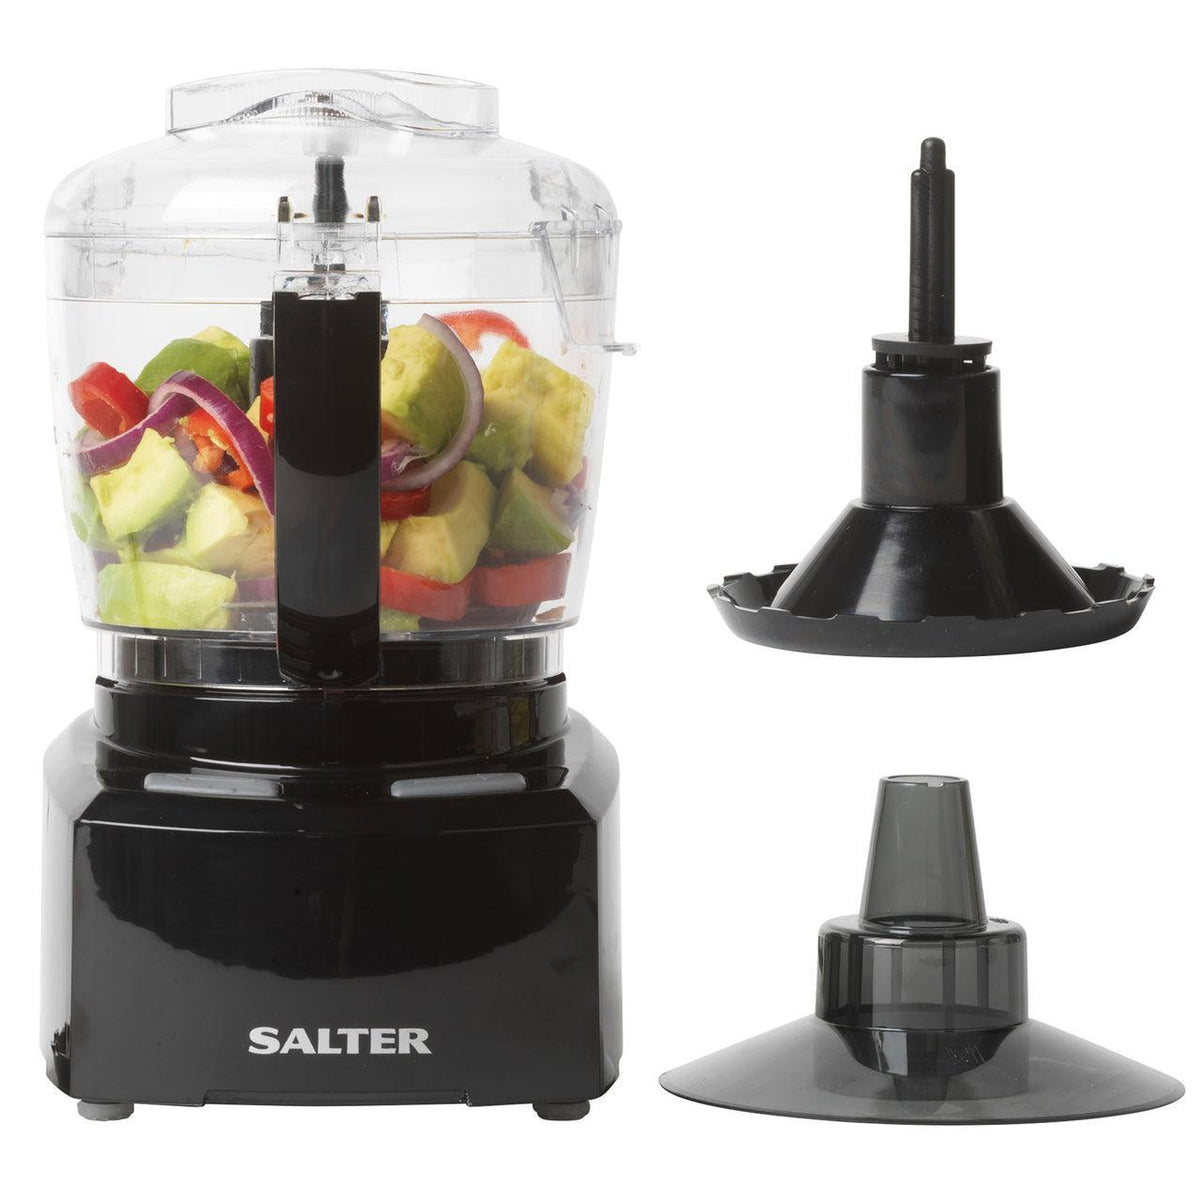 Salter 8 in 1 Compact Mini Choper Food Processor with 1 ltr Grater - Choice Stores